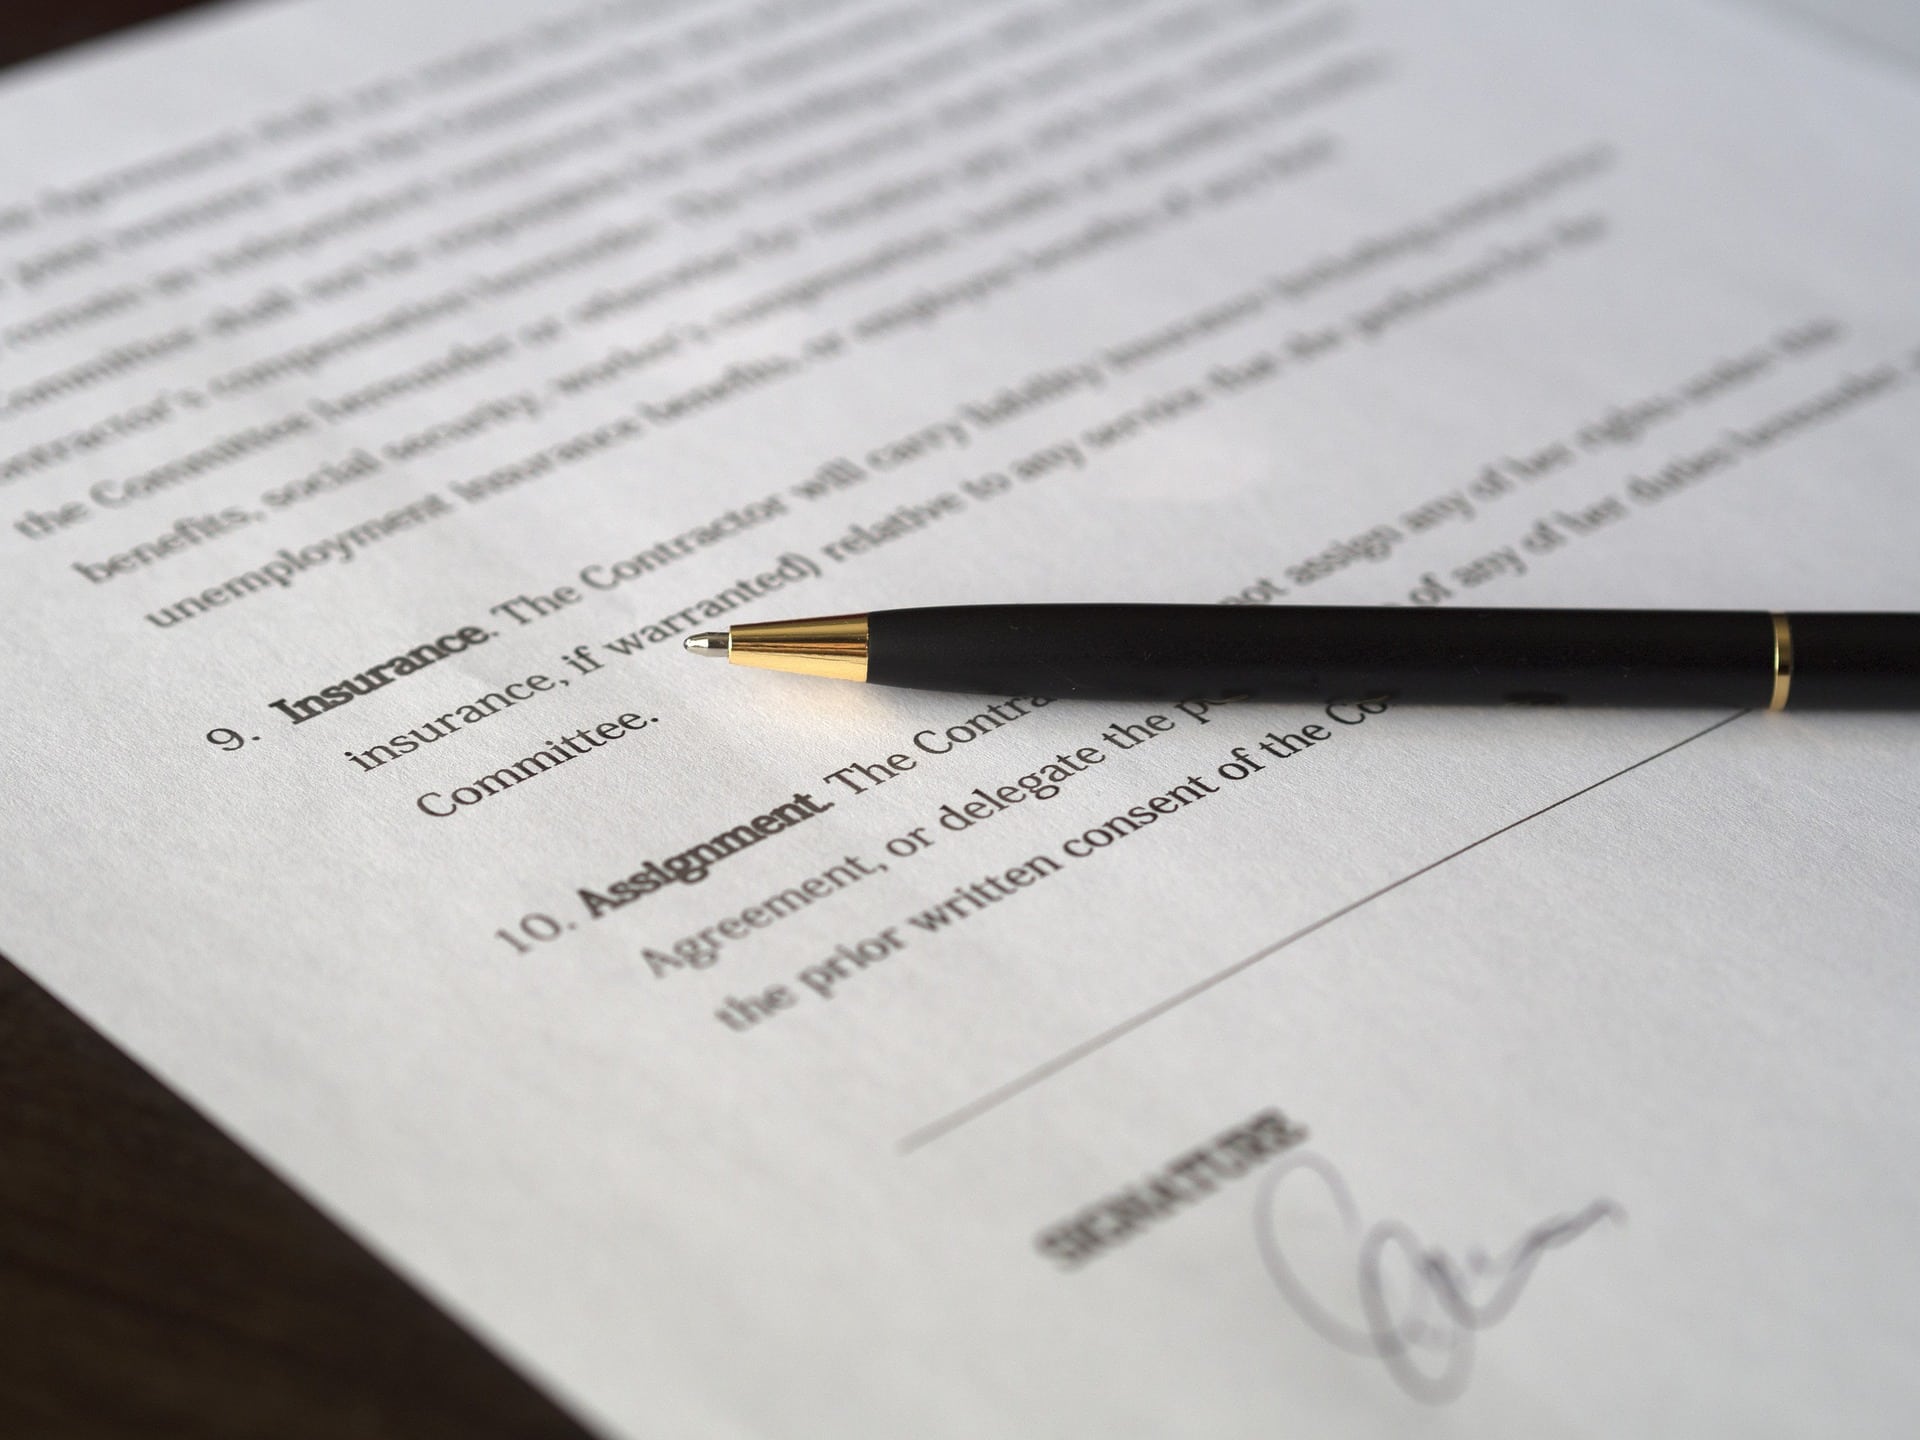 Equipment Rental Agreement Terms & Conditions: What to Include